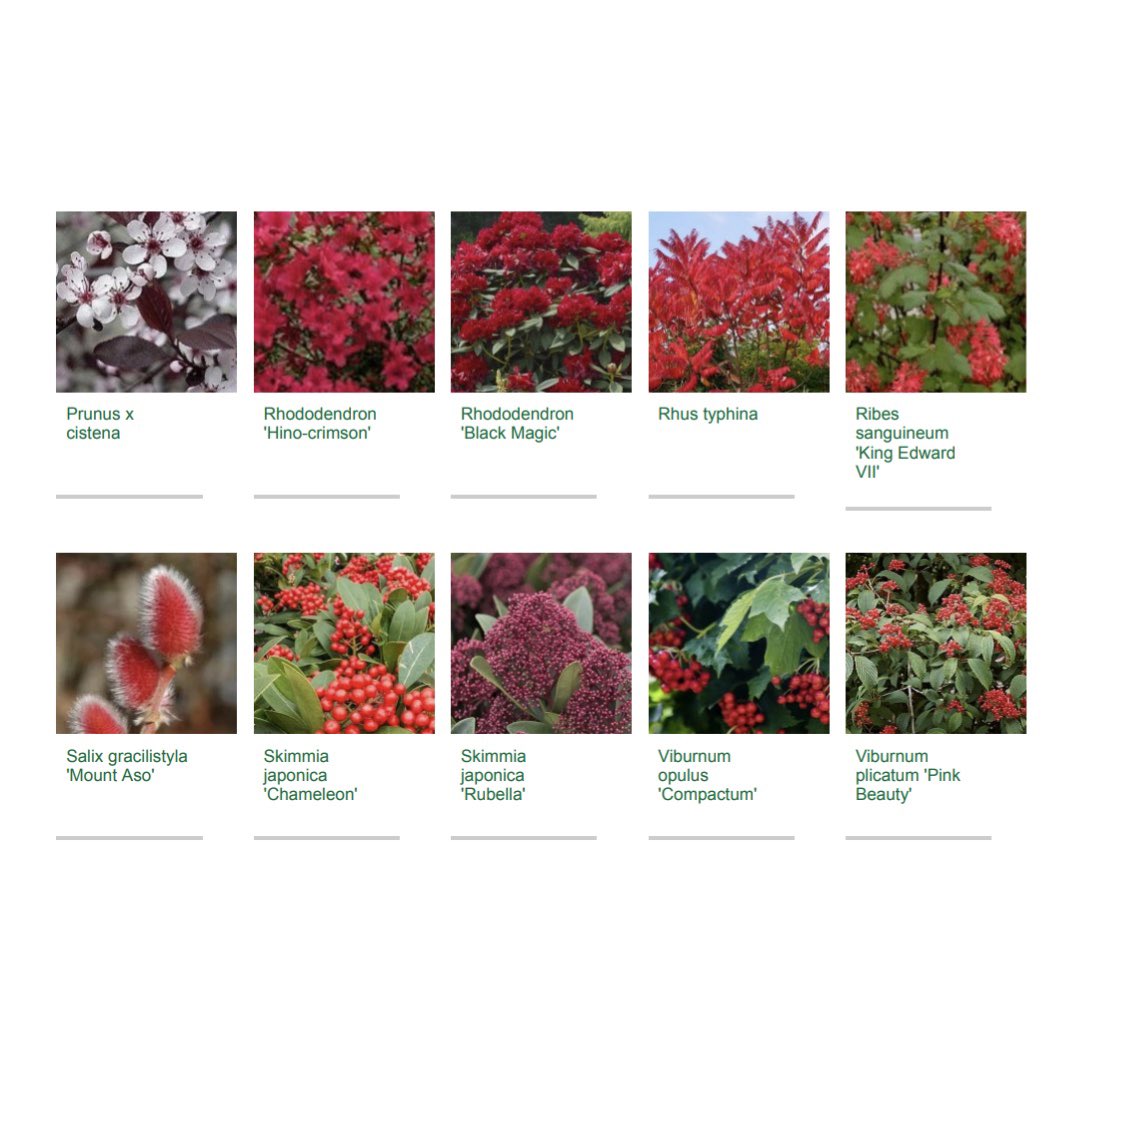 Red and ruby are order of the day for a current project in Edinburgh. Using @ShootGardening makes creating & labeling a PDF with loads of plants super easy. #plantingplan #red #gardendesign #edinburgh